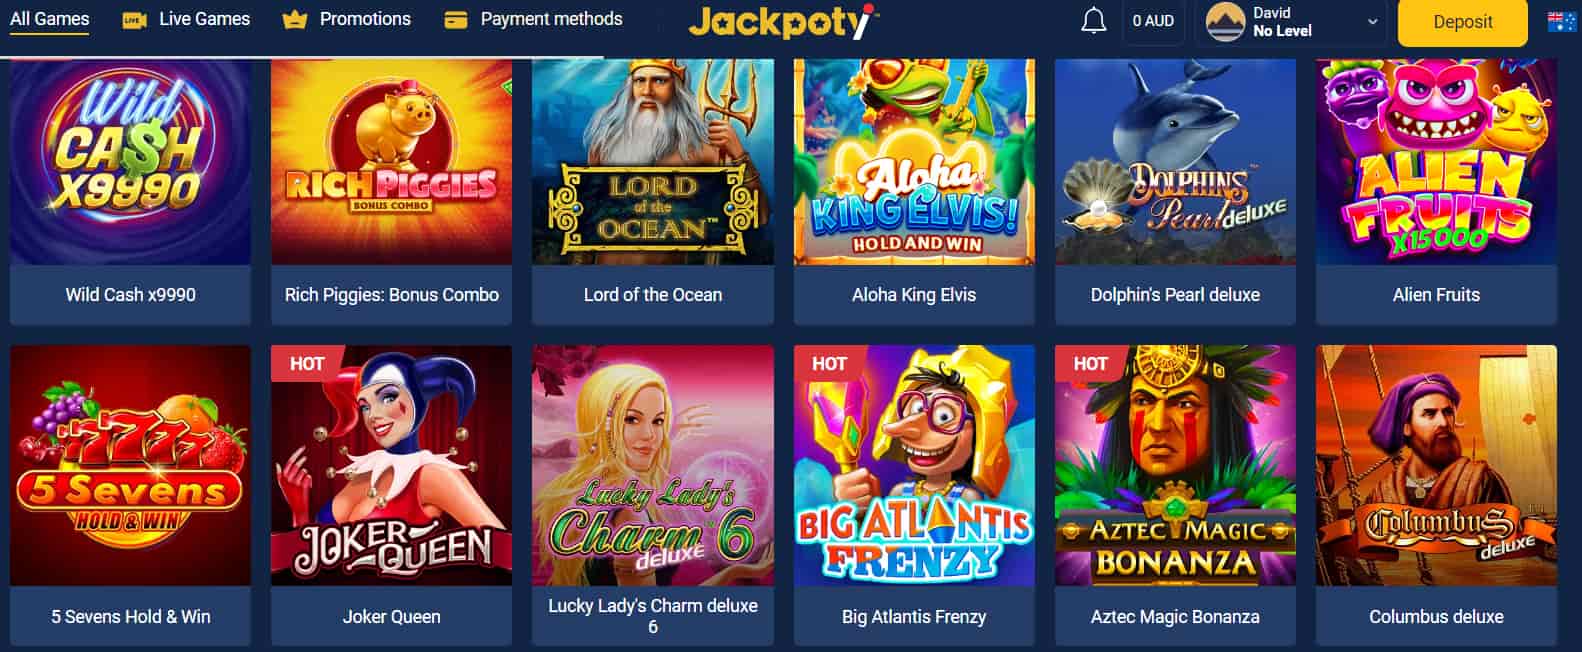 Choose an Instant Withdrawal Casino